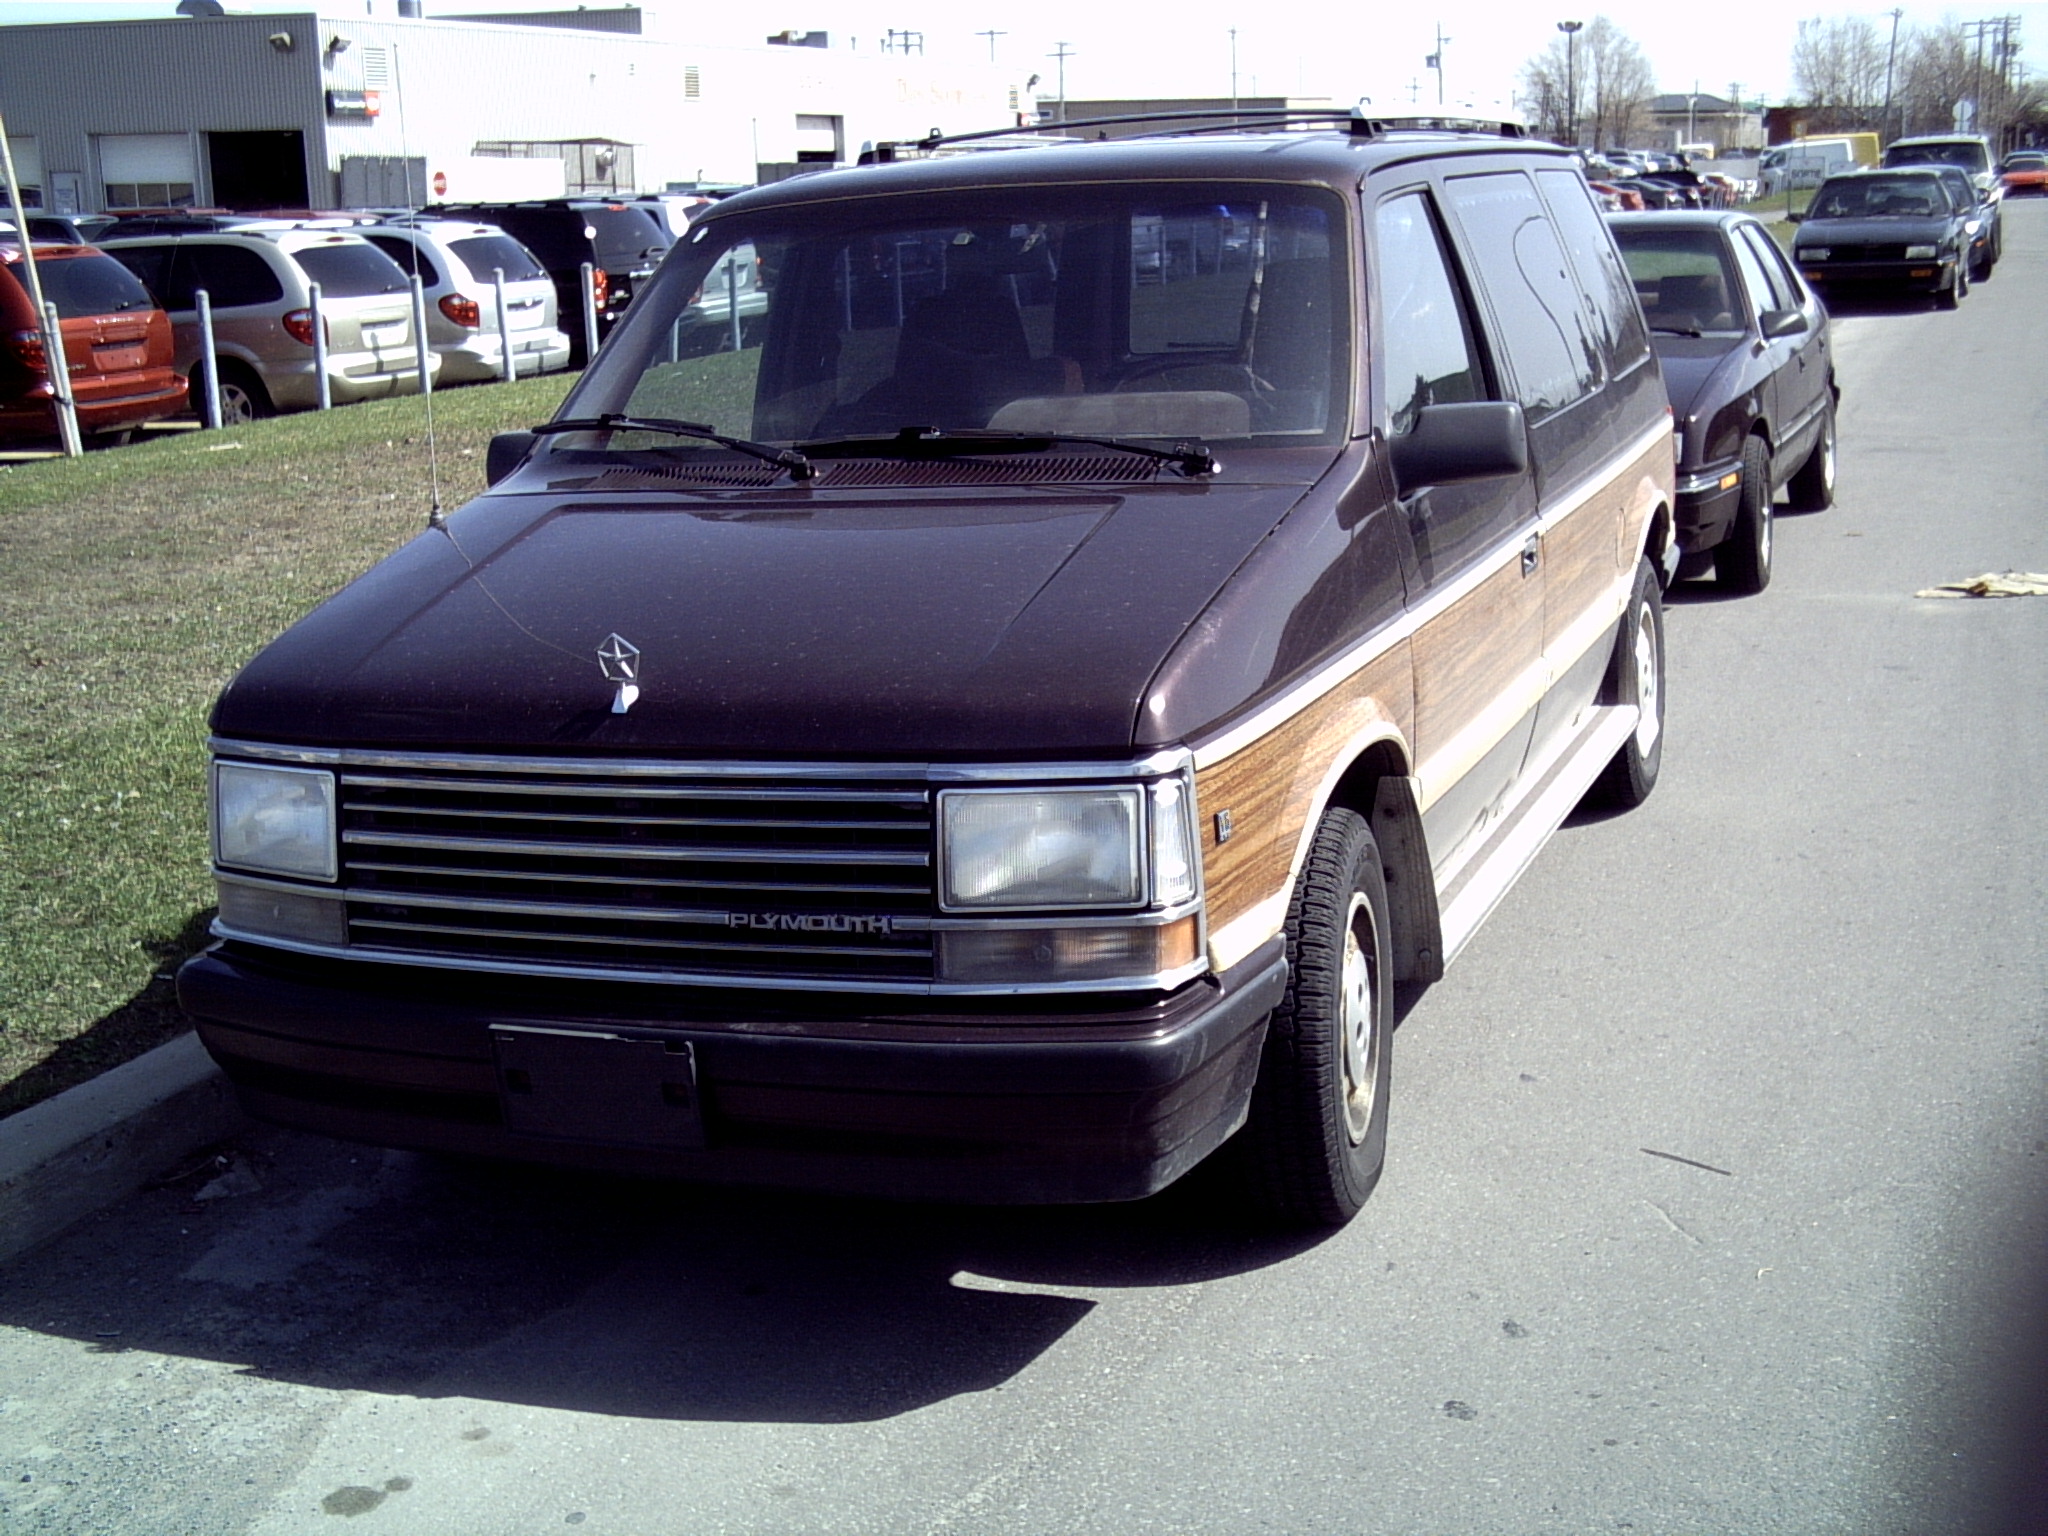 1986 plymouth voyager le mpg